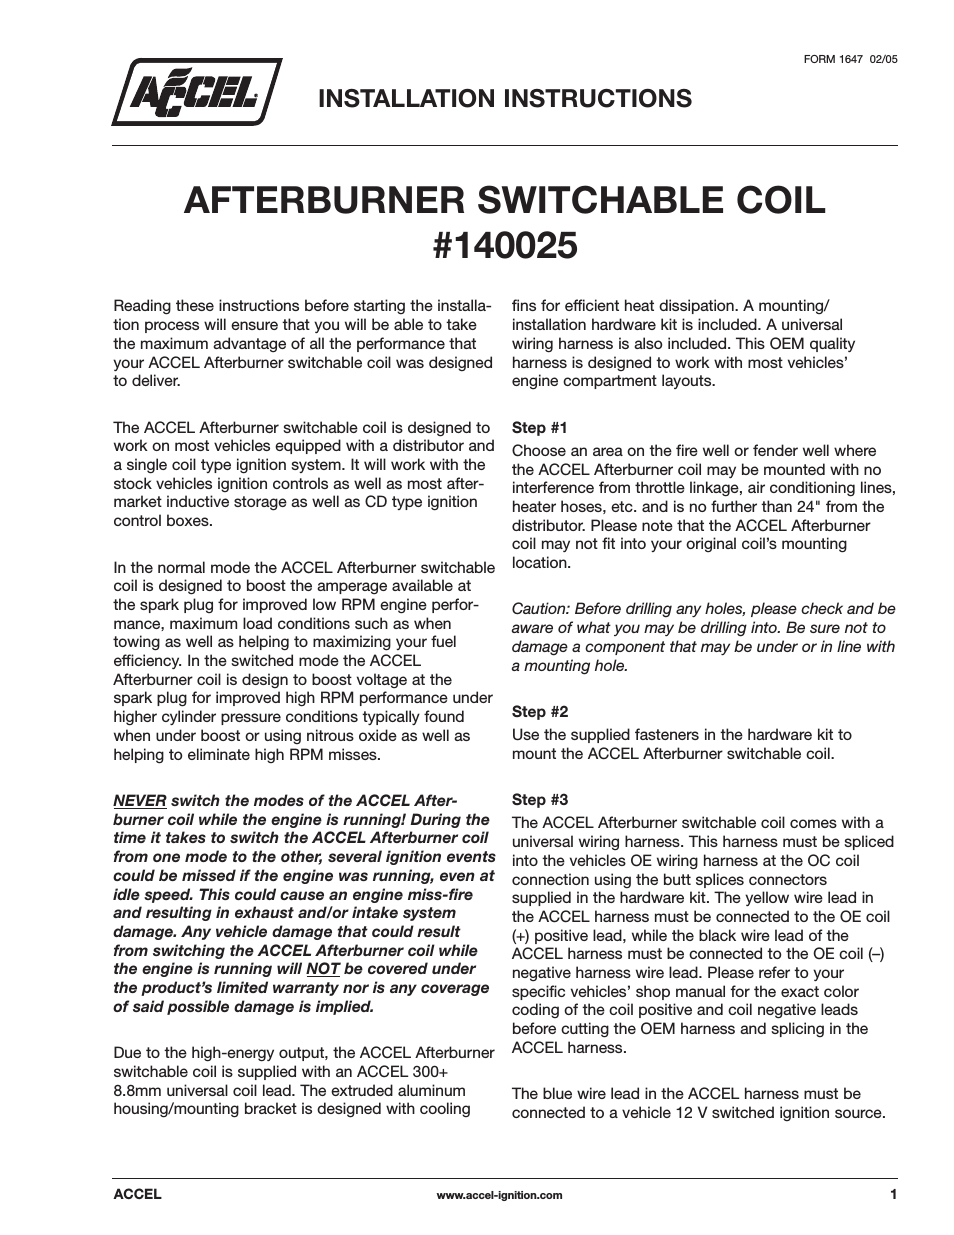 ACCEL AFTERBURNER SWITCHABLE COIL 140025